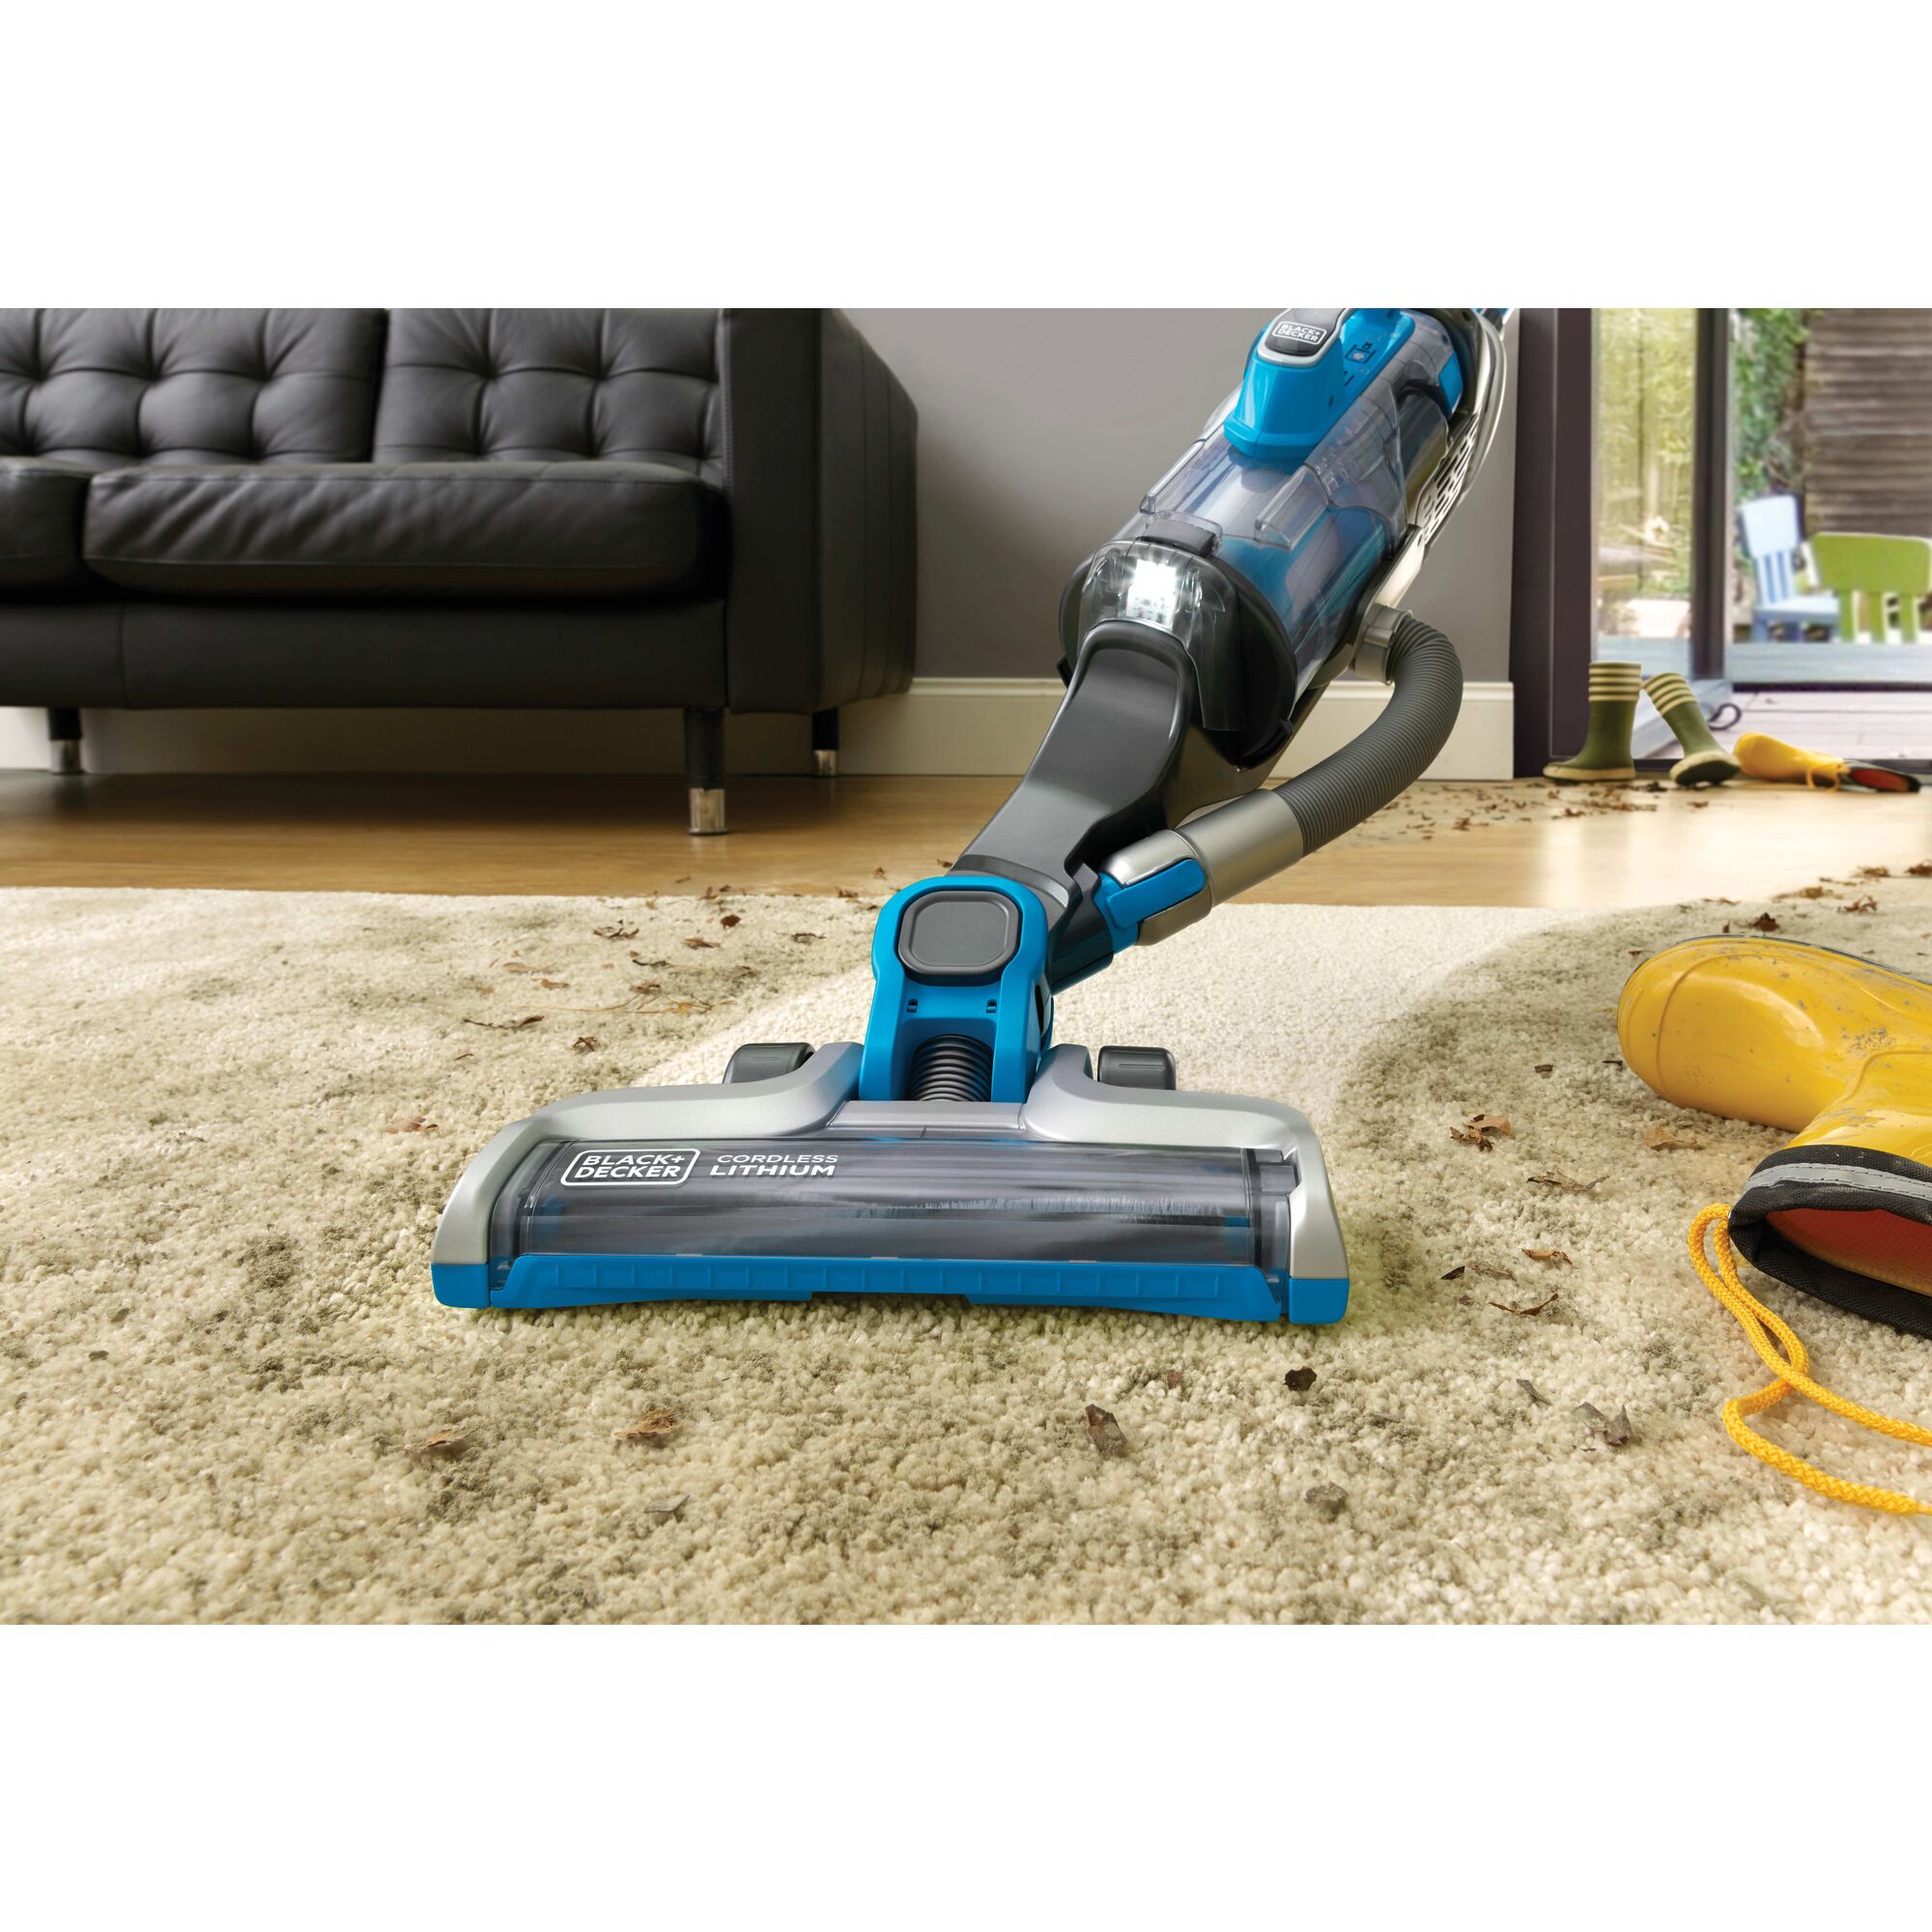 POWER SERIES PRO cordless 2 in 1 vacuum being used by a person to clean carpet.